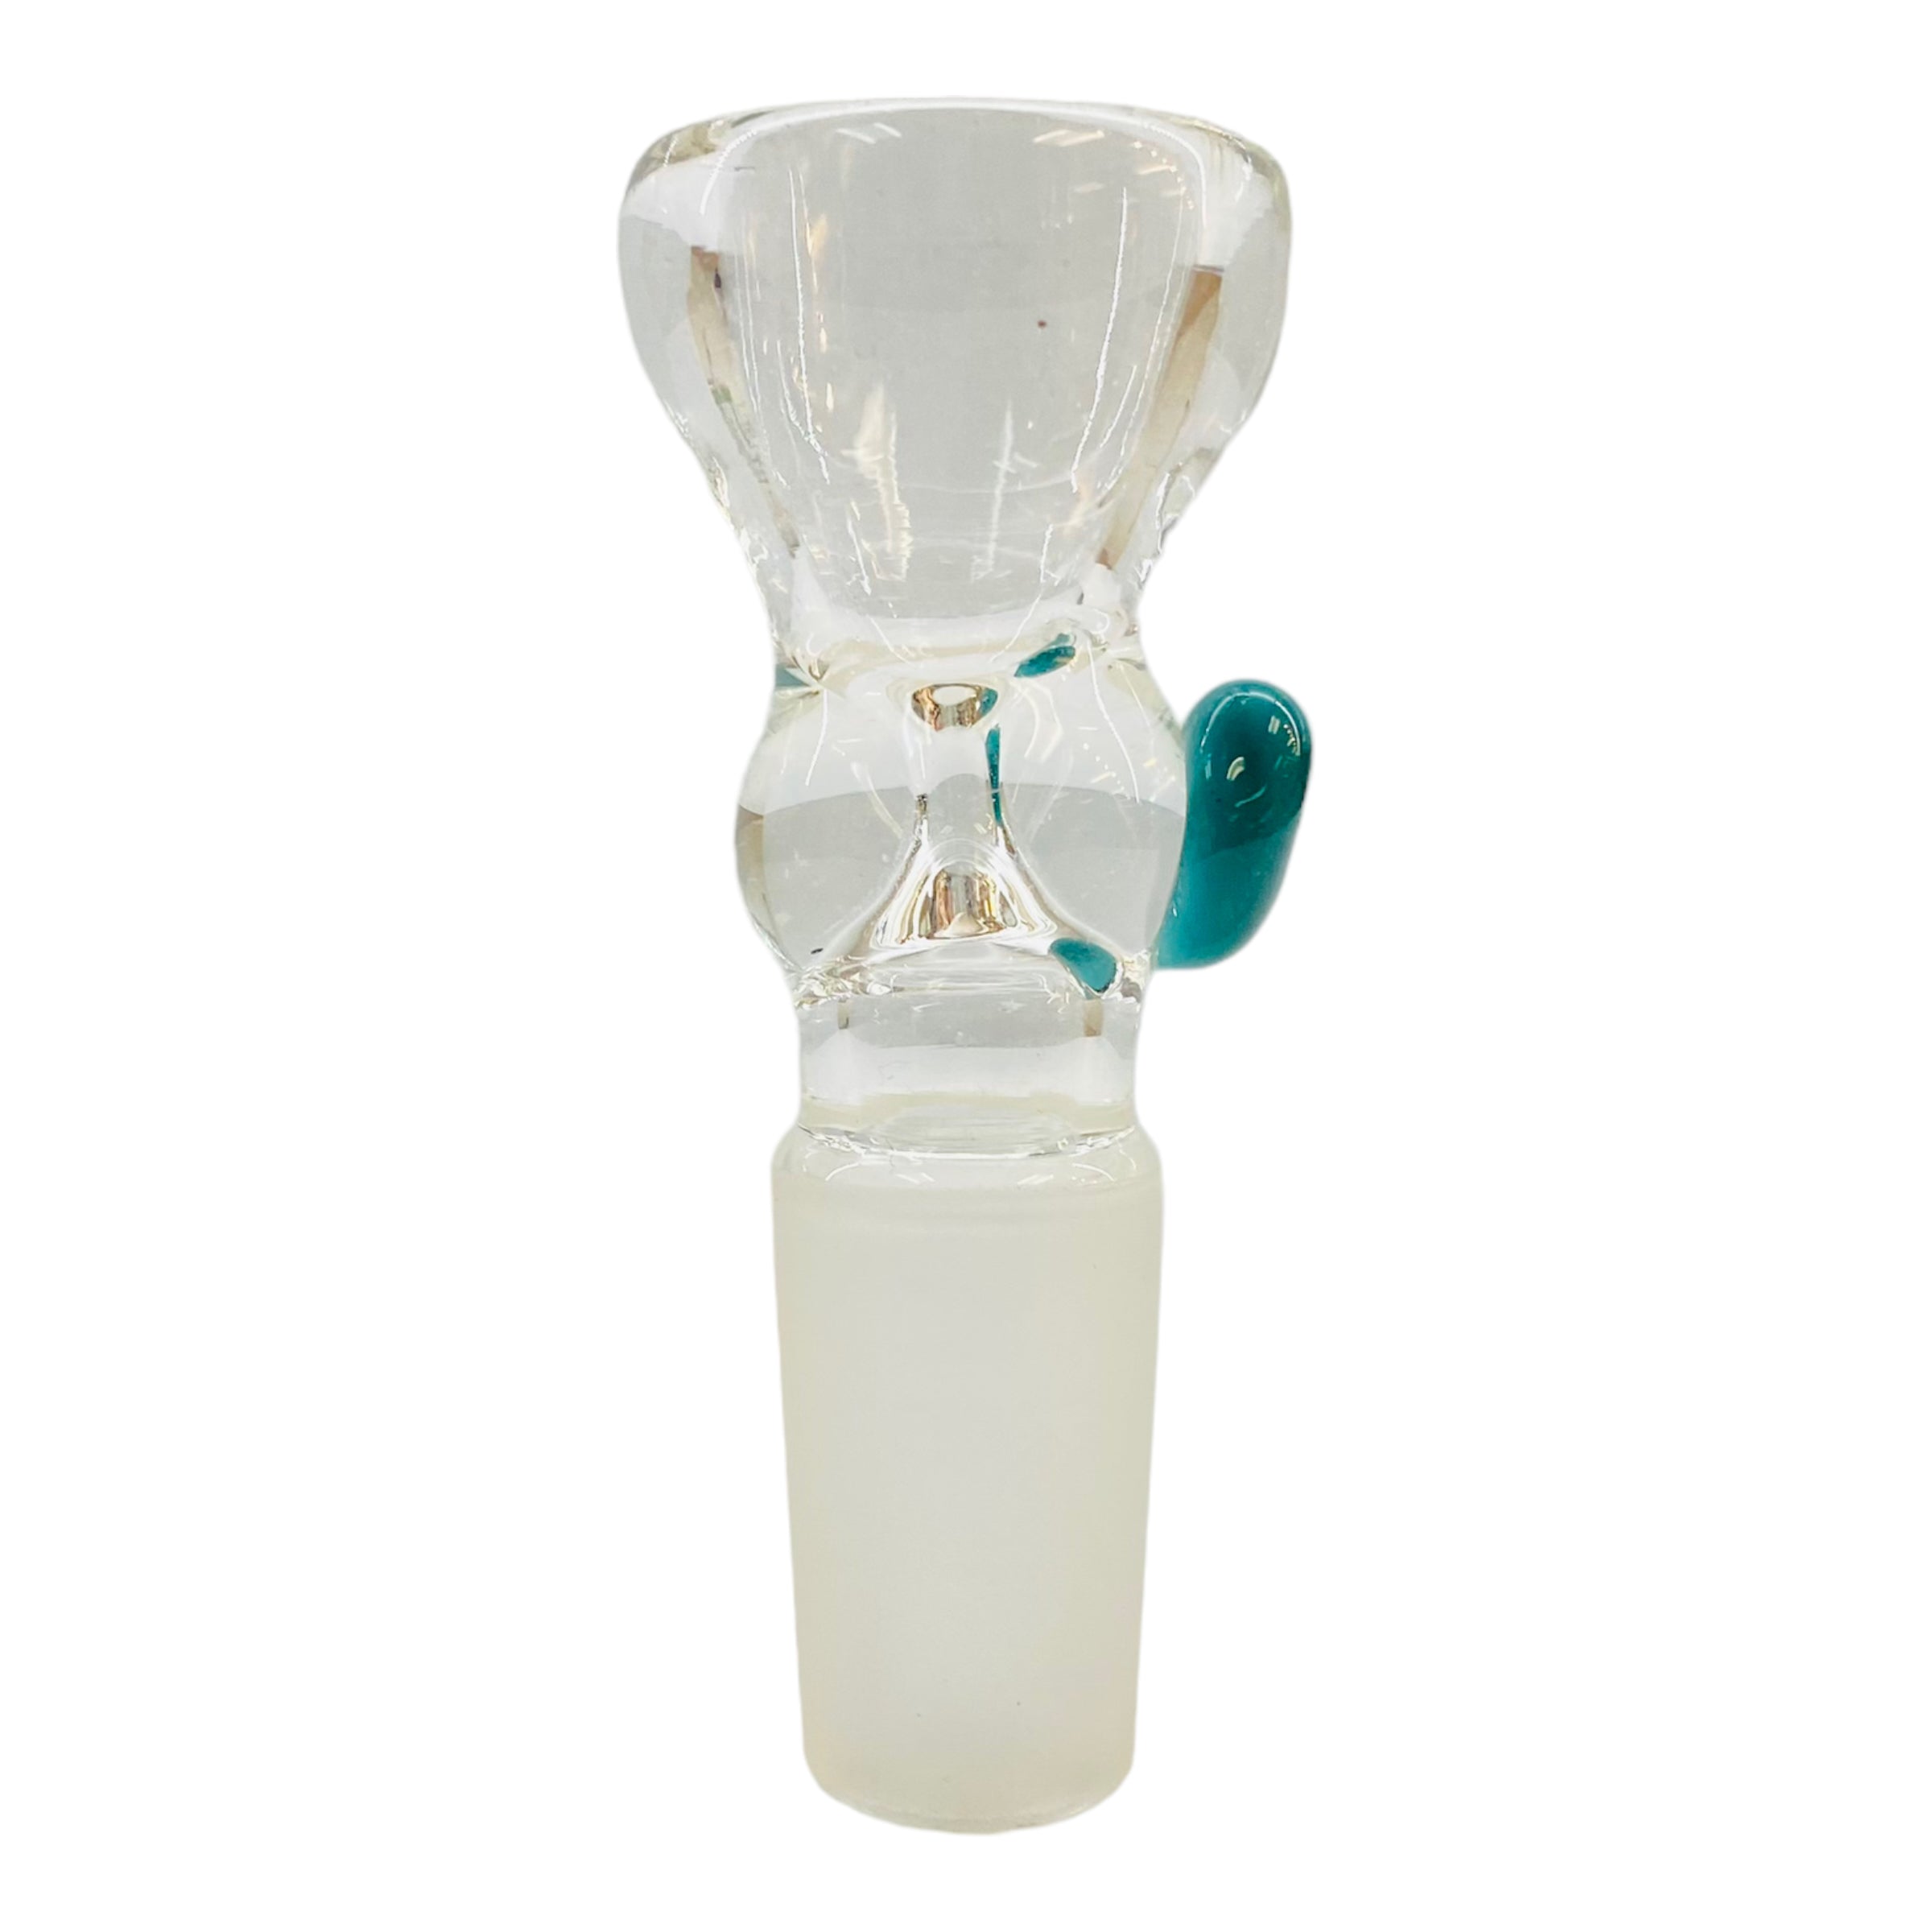 14mm Flower Bowl - Clear Martini Shape Funnel Bong Bowl Piece With Color Dot - Teal